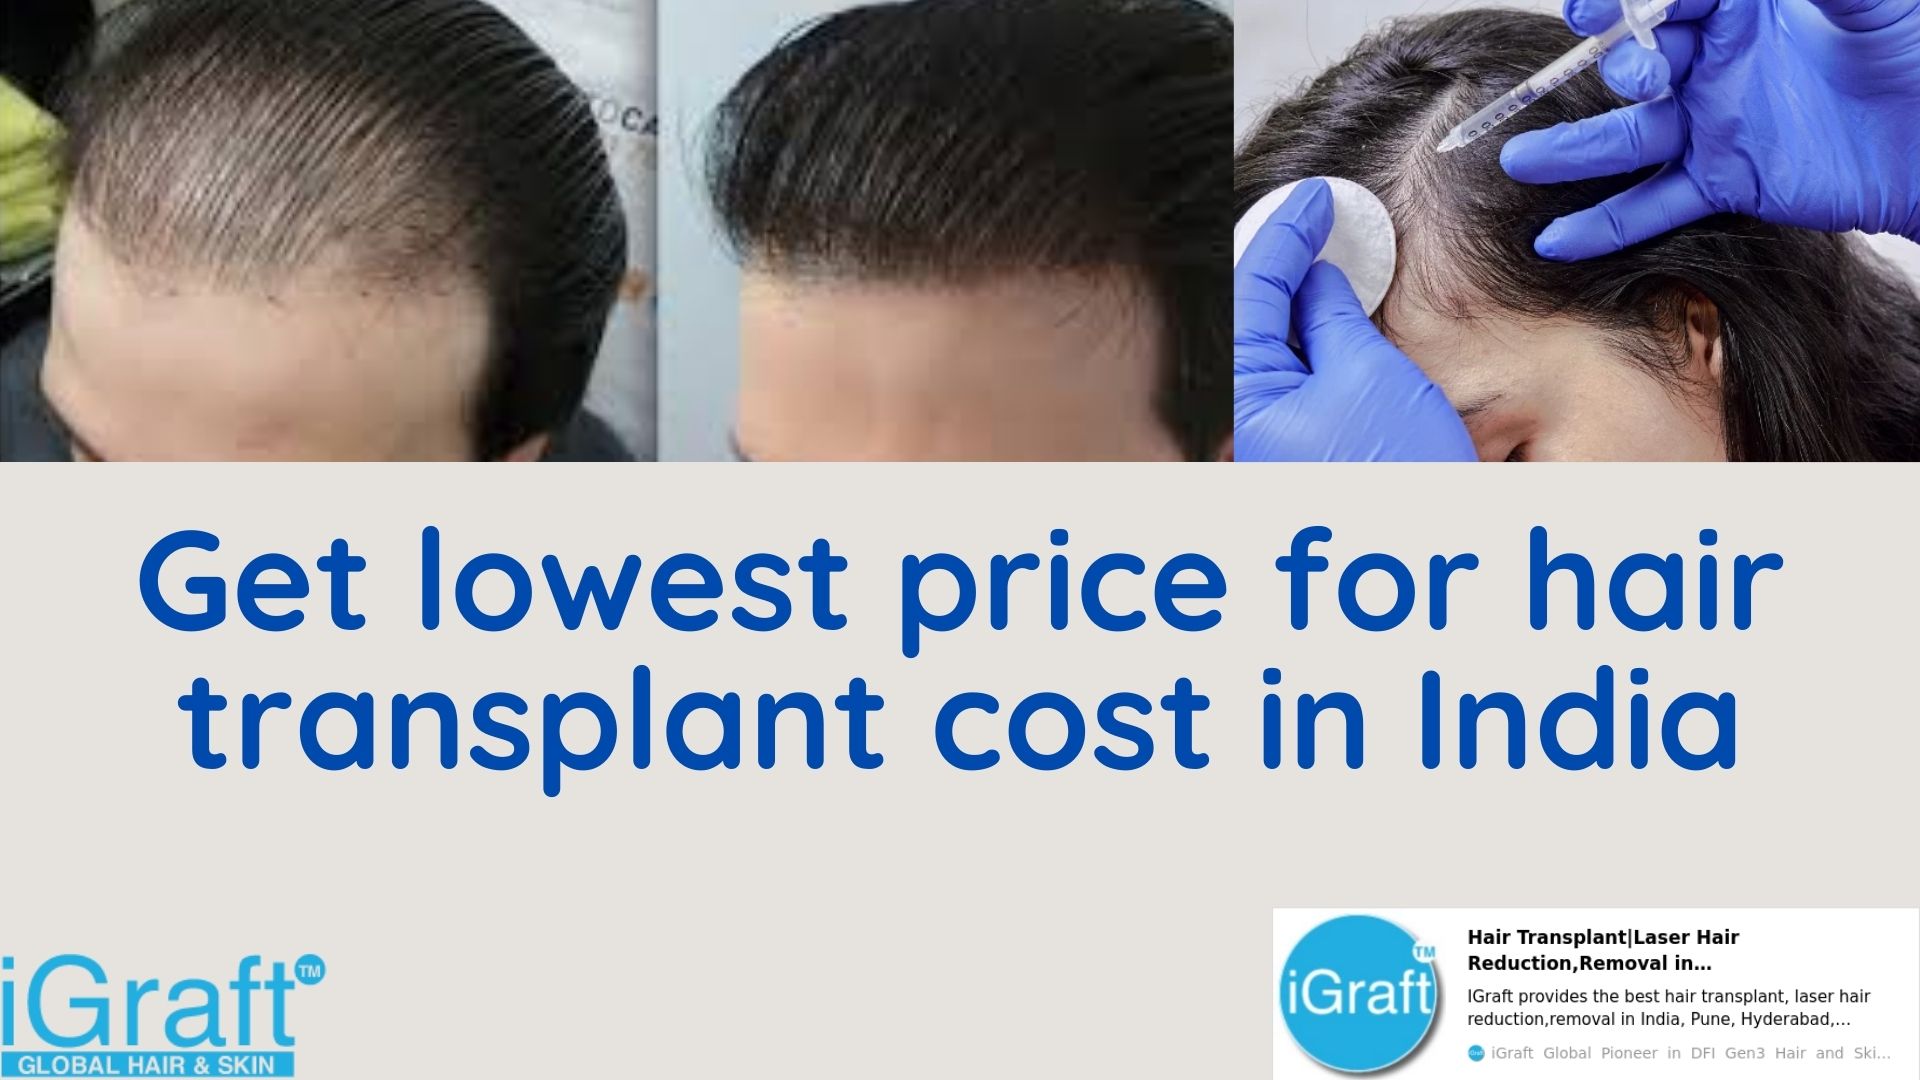 Get lowest price for hair transplant cost in India